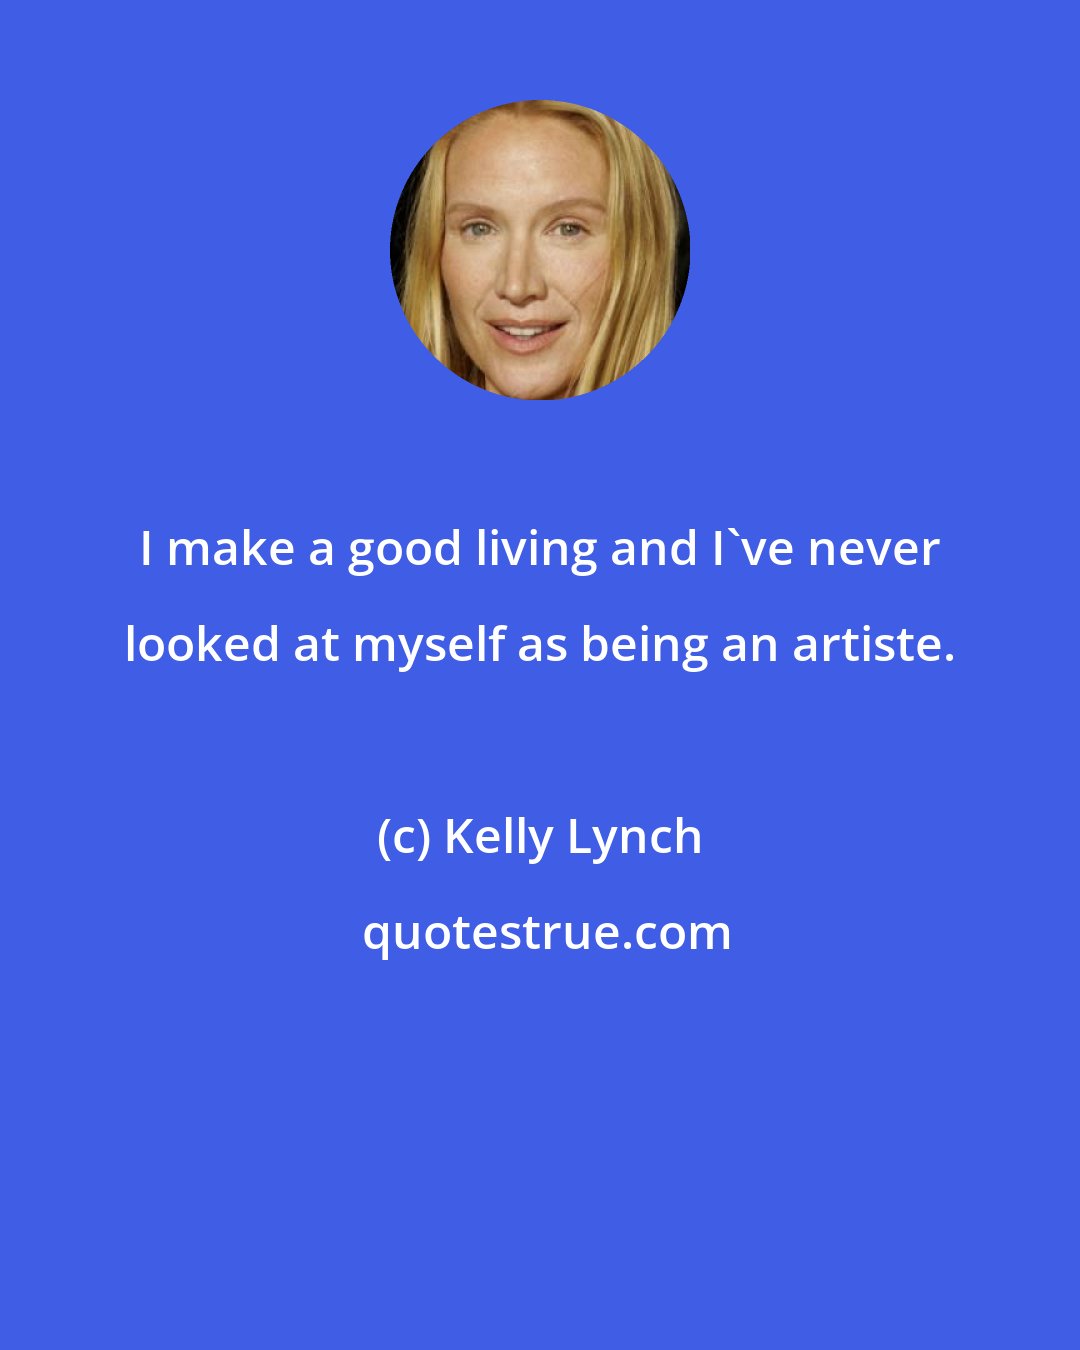 Kelly Lynch: I make a good living and I've never looked at myself as being an artiste.